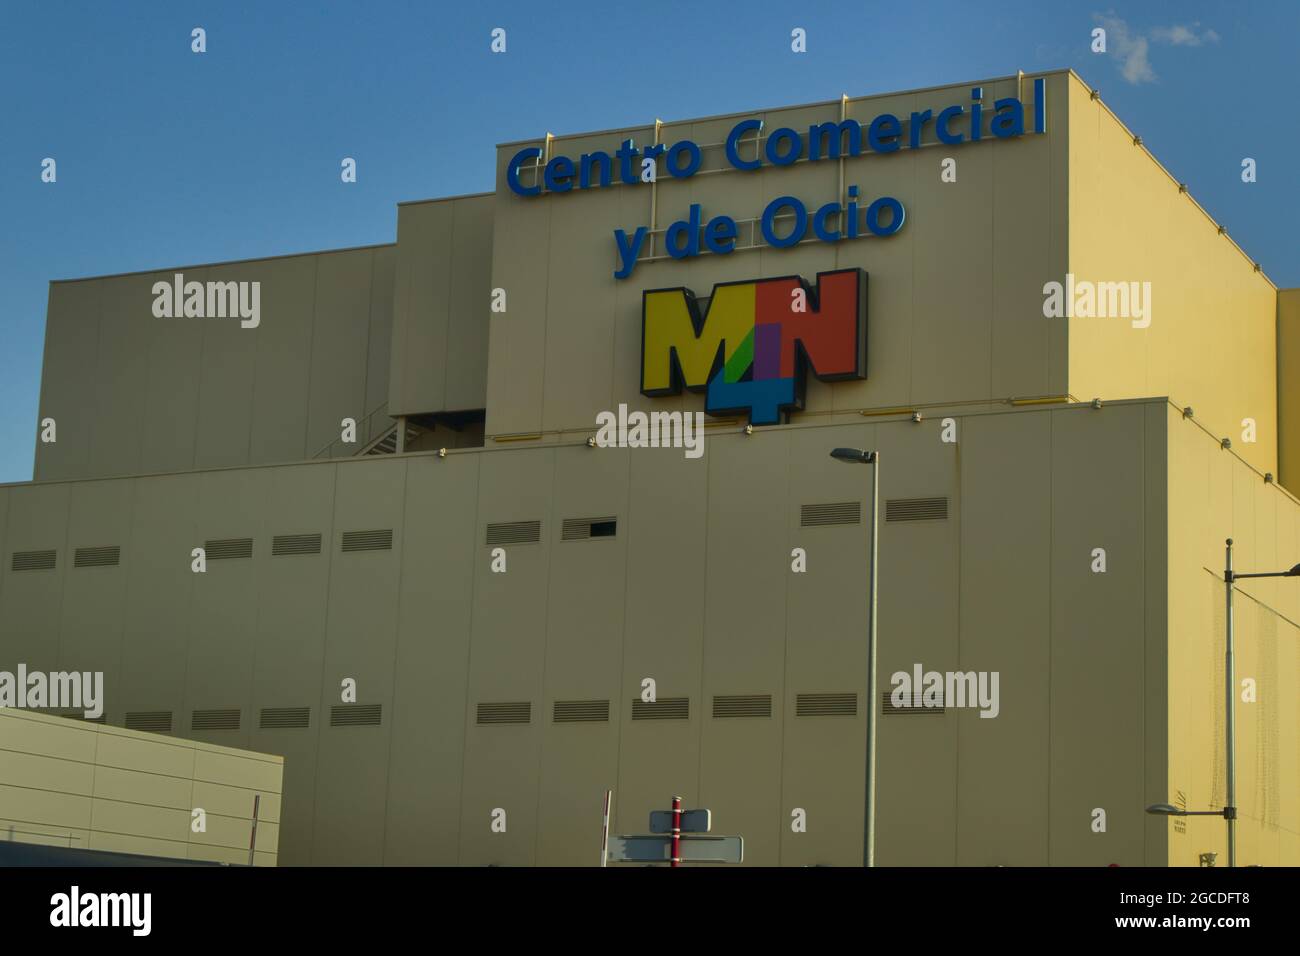 2021, July. Alfafar, Valencia, Spain. Image of the facade and logo of the MN4 shopping center in the city of Alfafar in Valencia, Spain Stock Photo